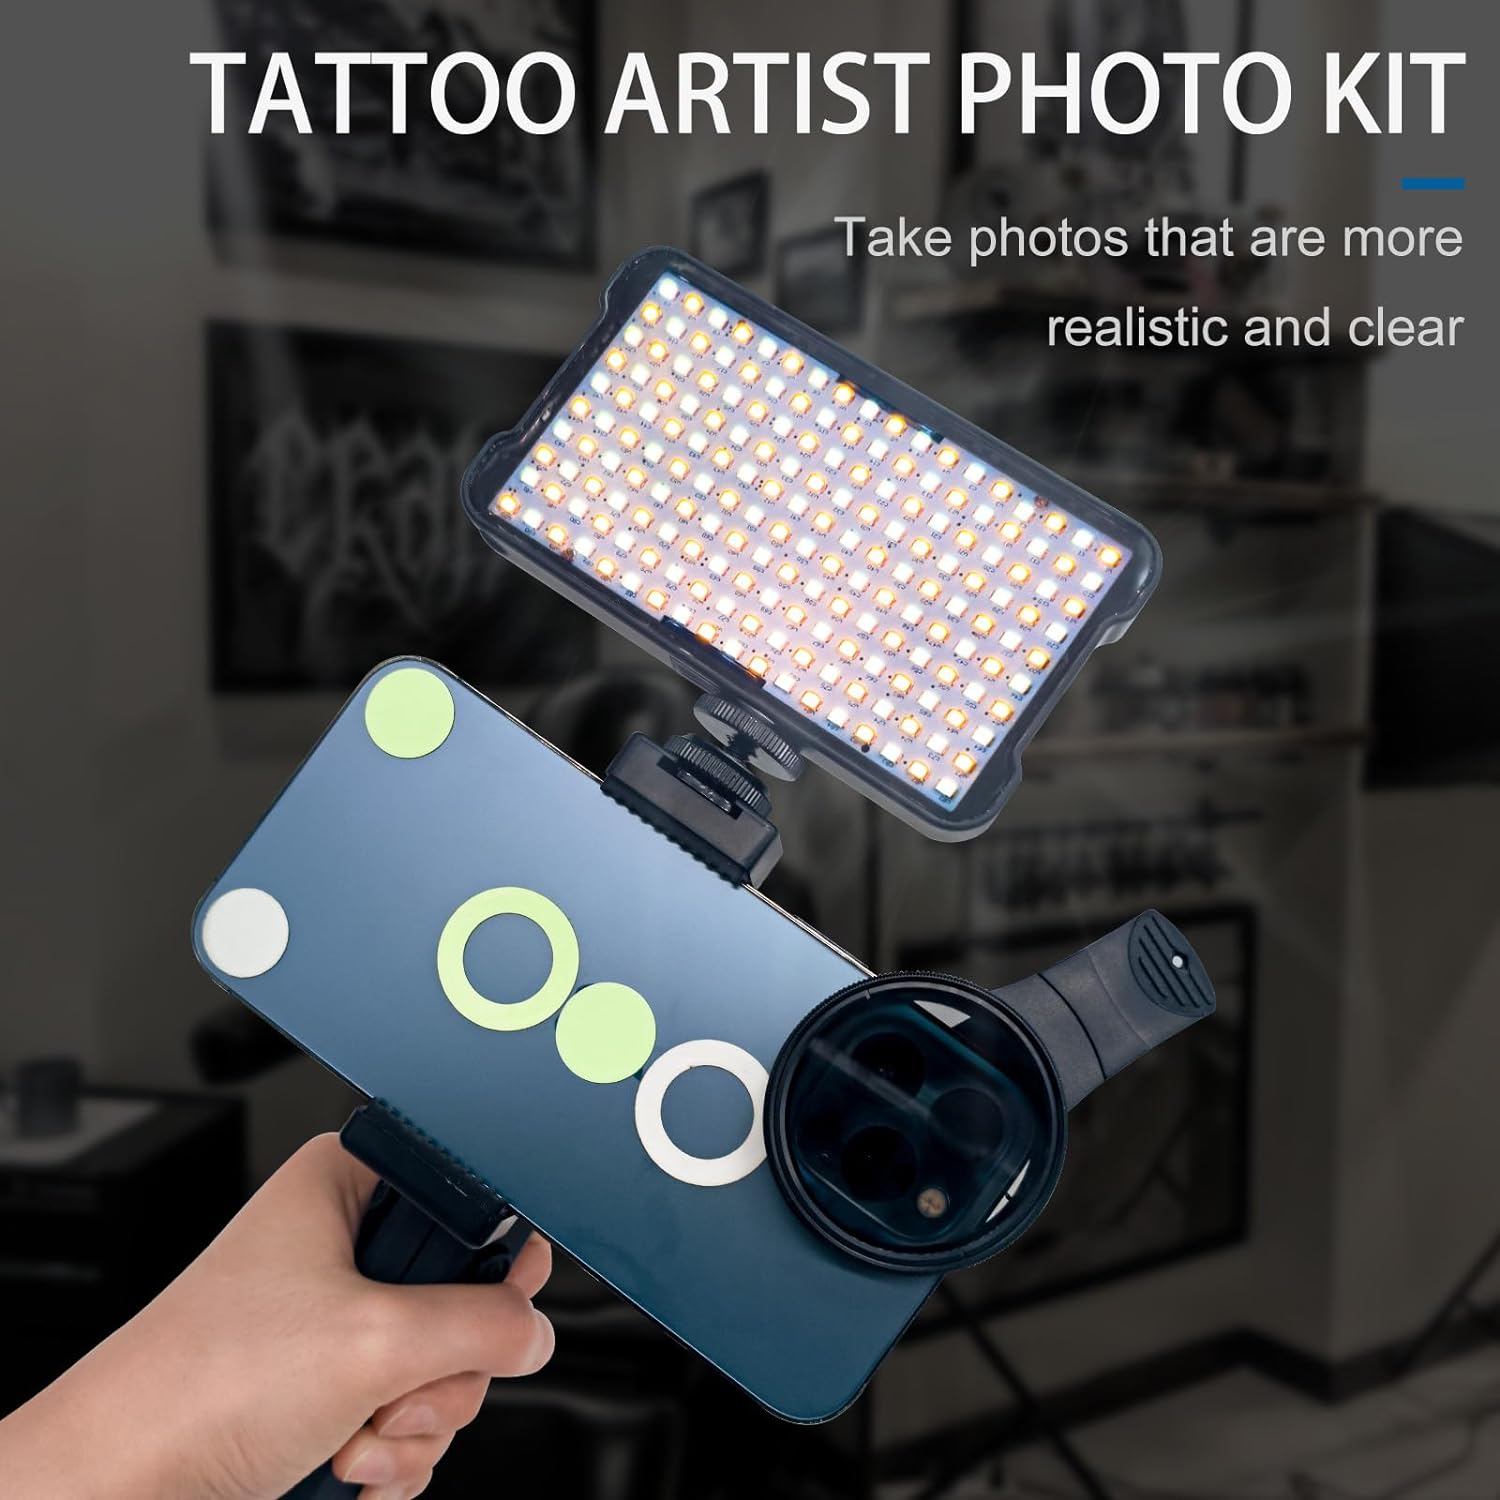 Professional Tattoo Photography Anti-3.0 Glare Kit 120 LED Beads（12W）Brighter and lighter